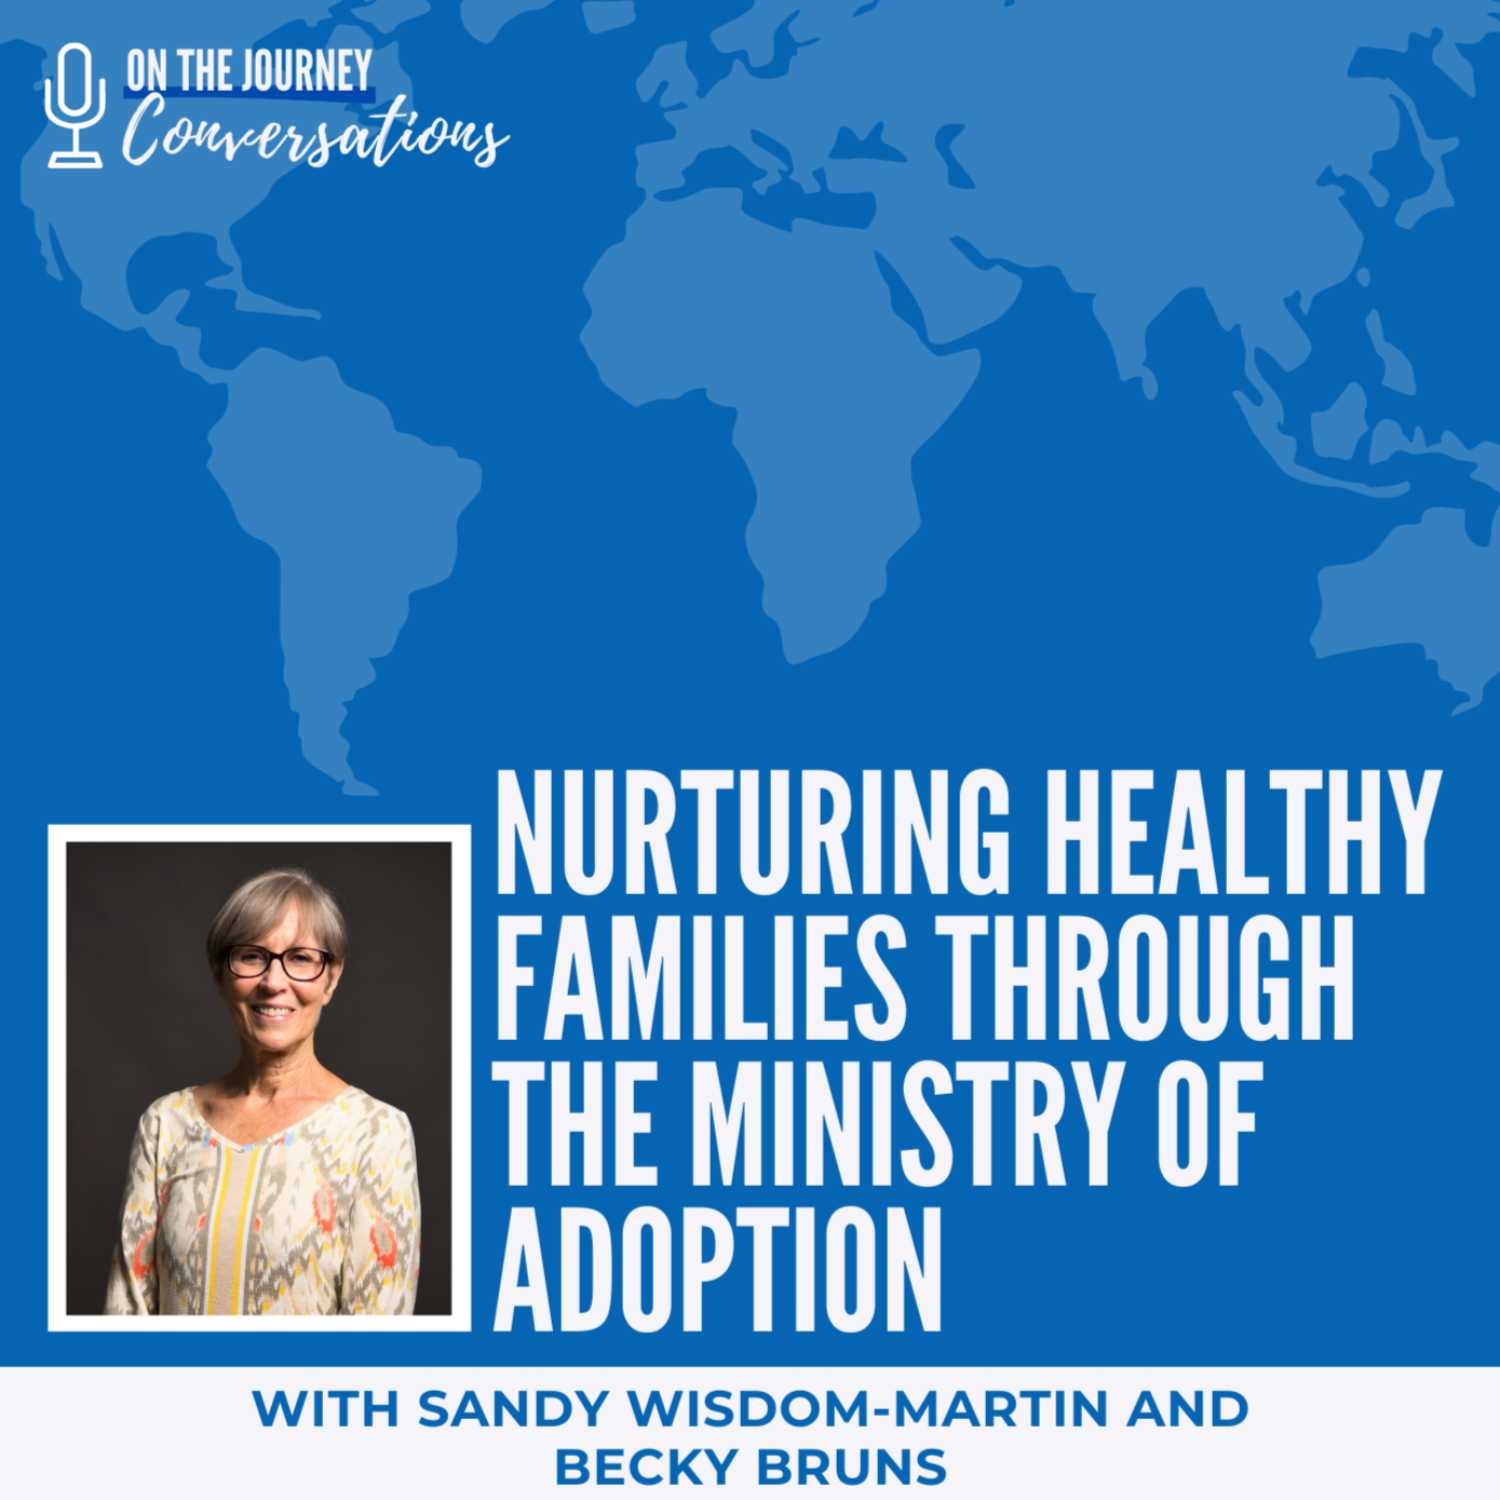 Nurturing Healthy Families Through the Ministry of Adoption